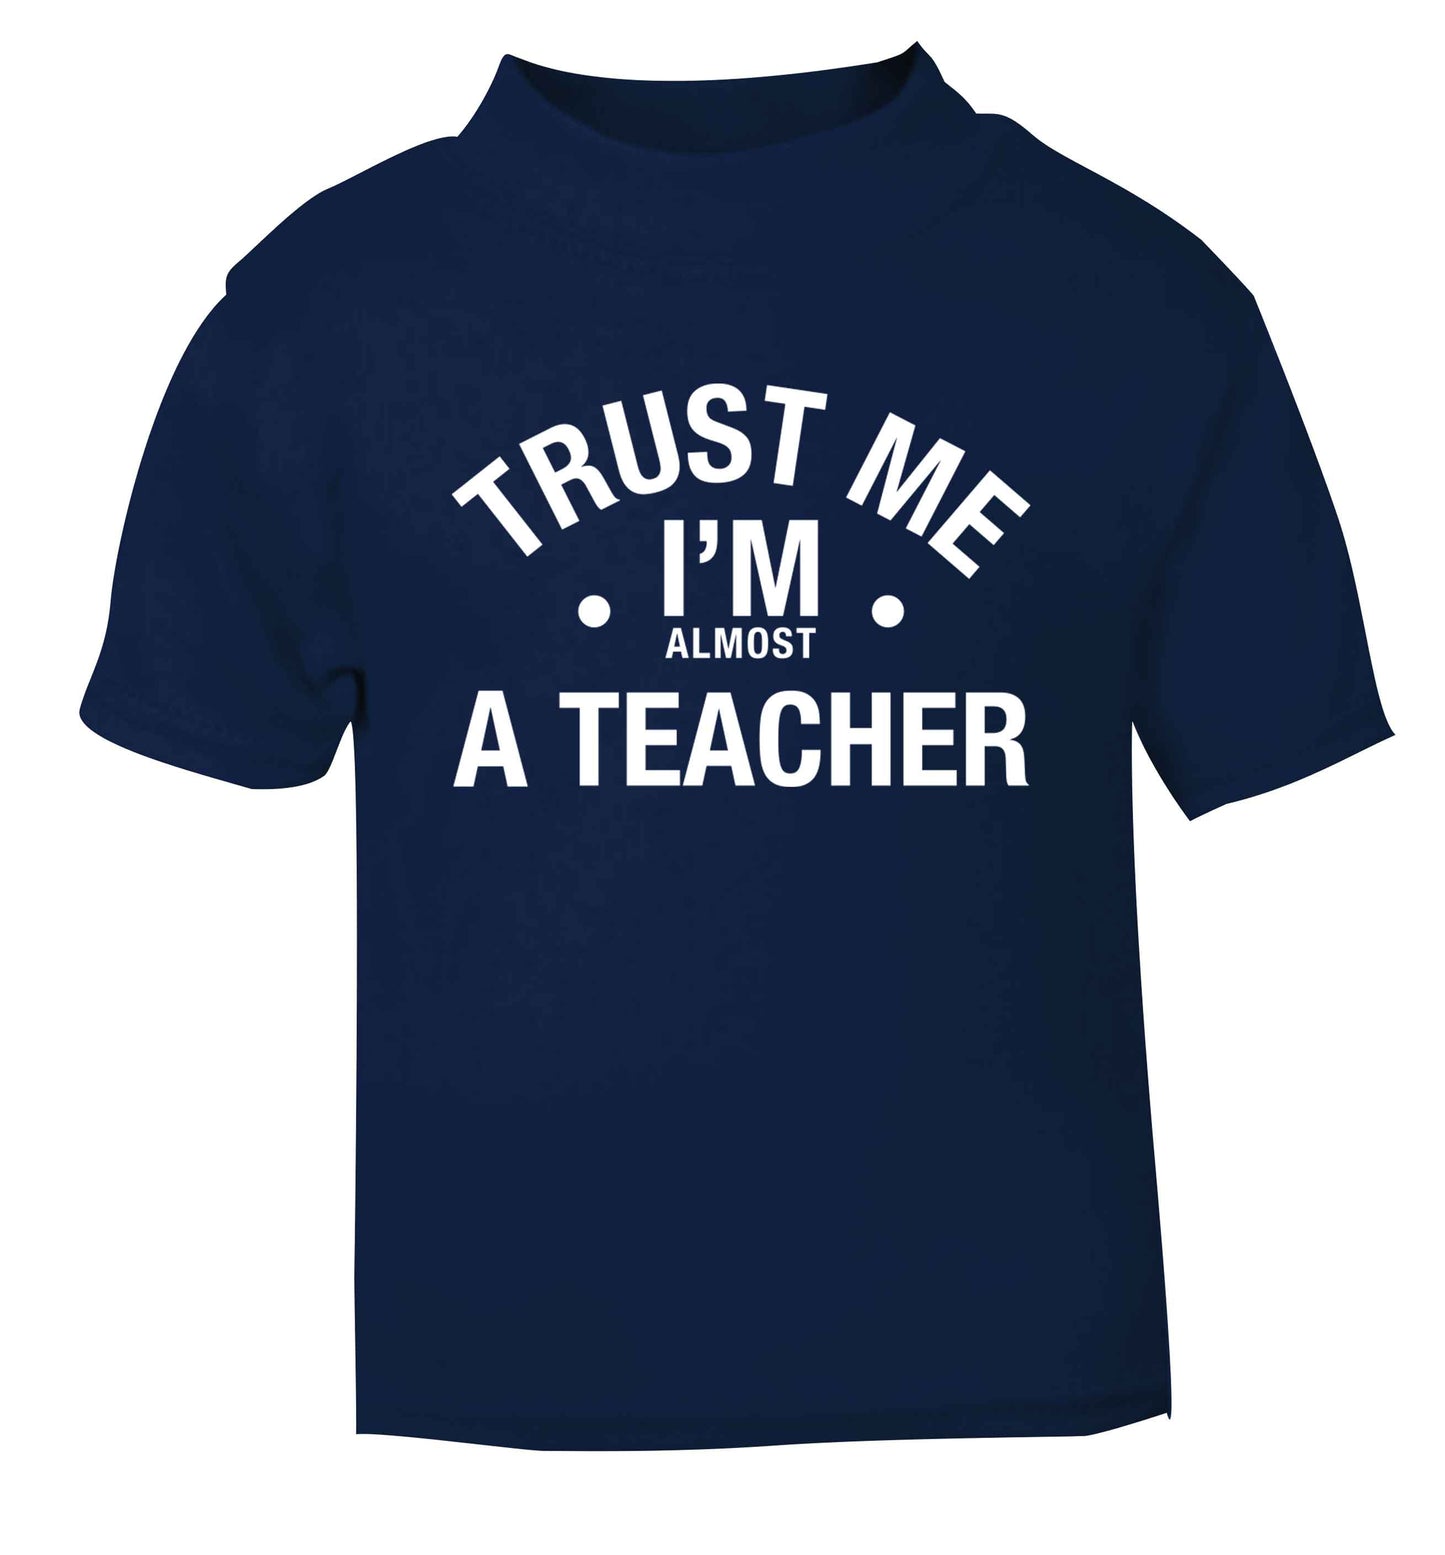 Trust me I'm almost a teacher navy baby toddler Tshirt 2 Years